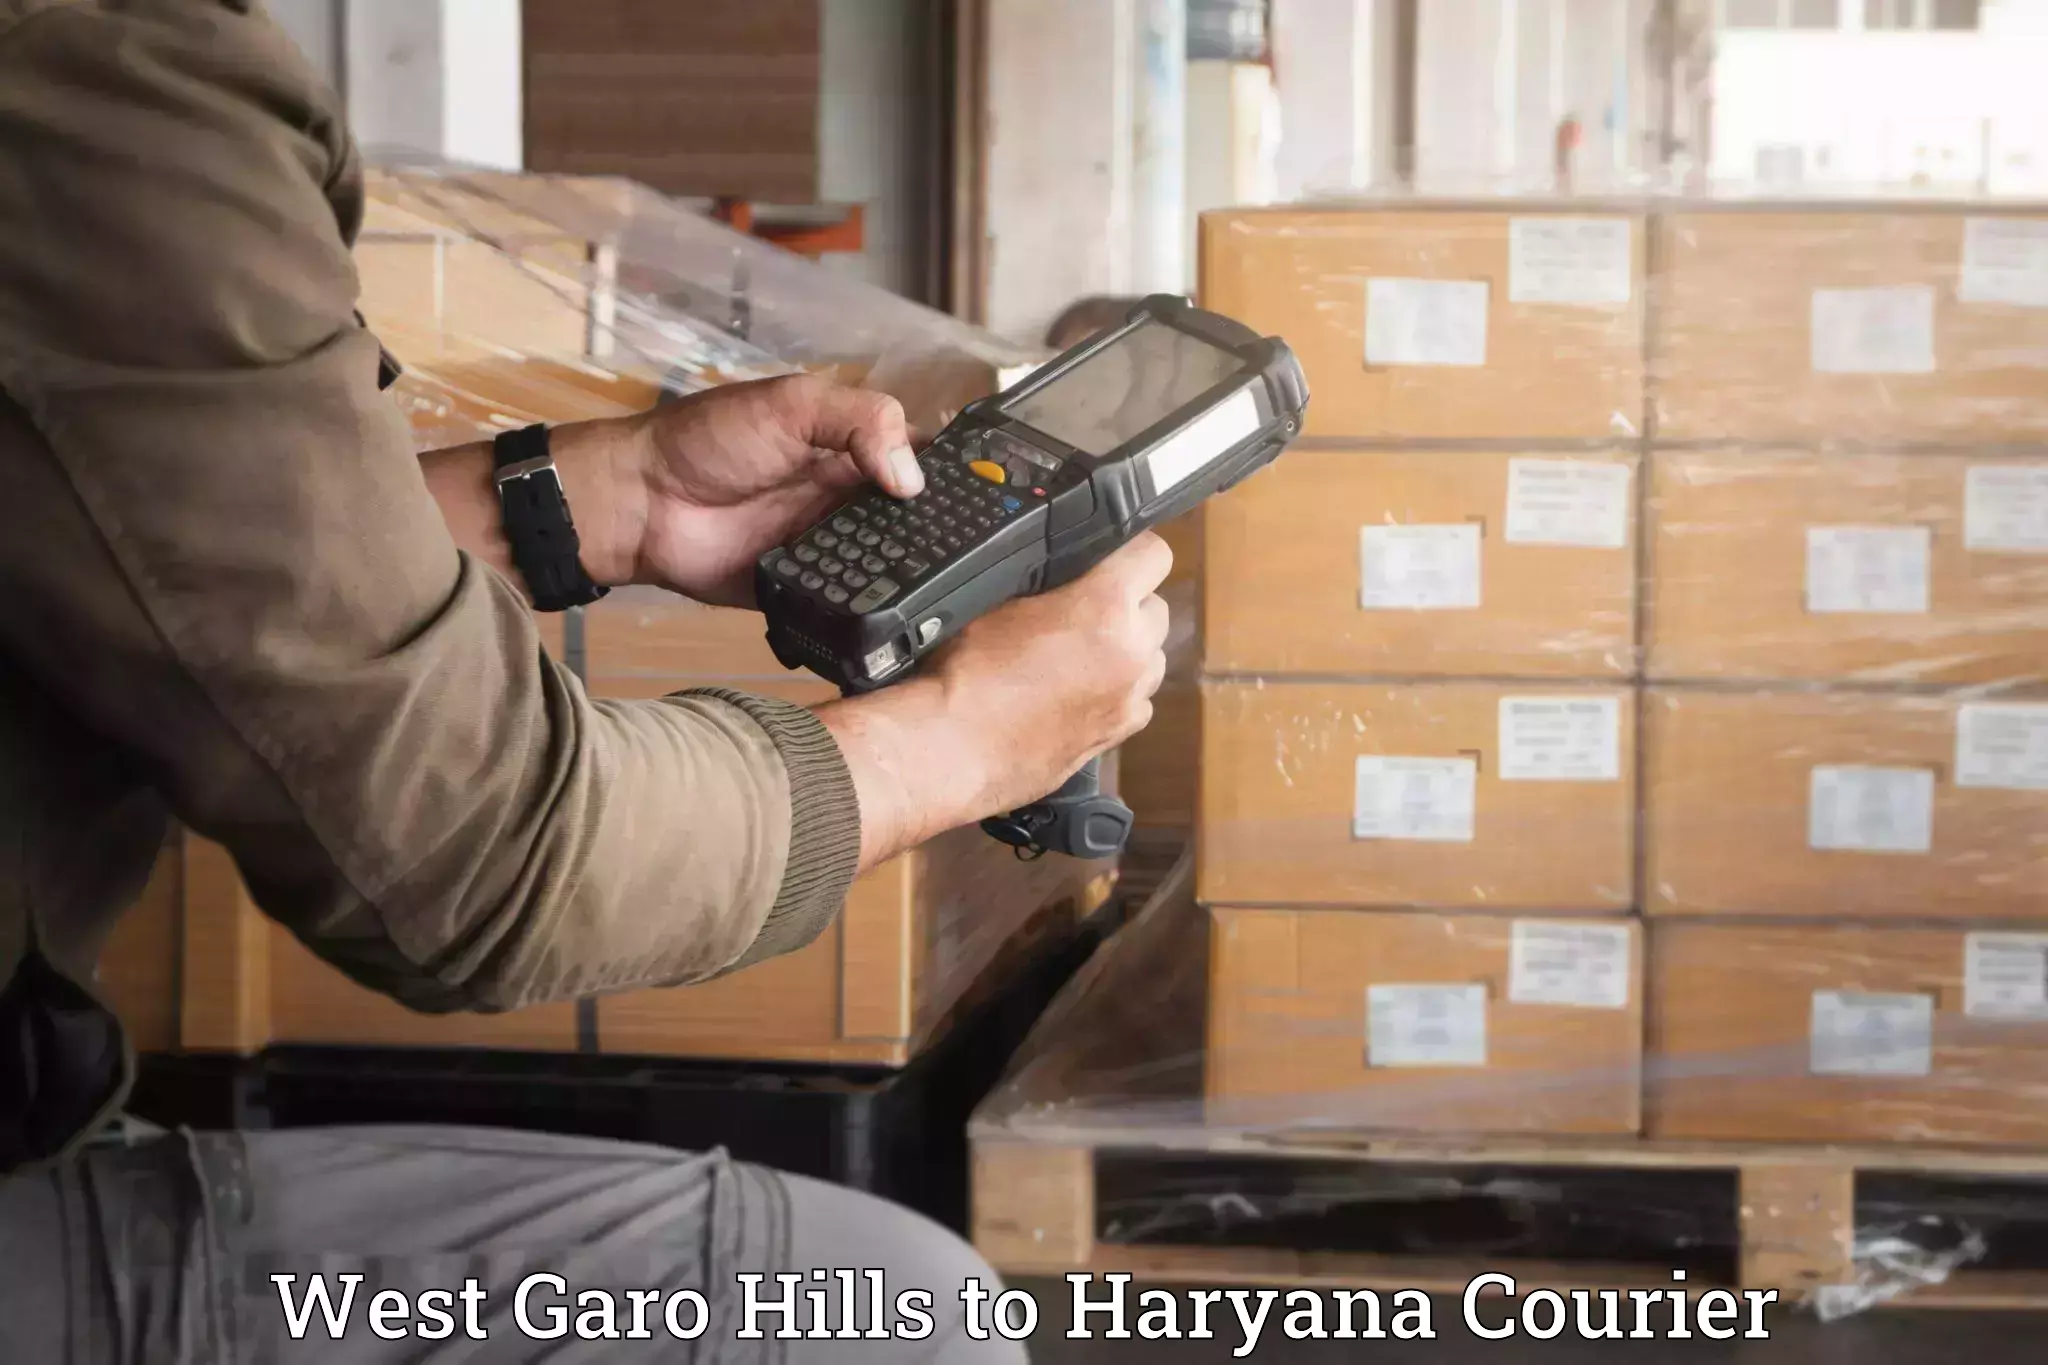 Professional moving company West Garo Hills to Meham